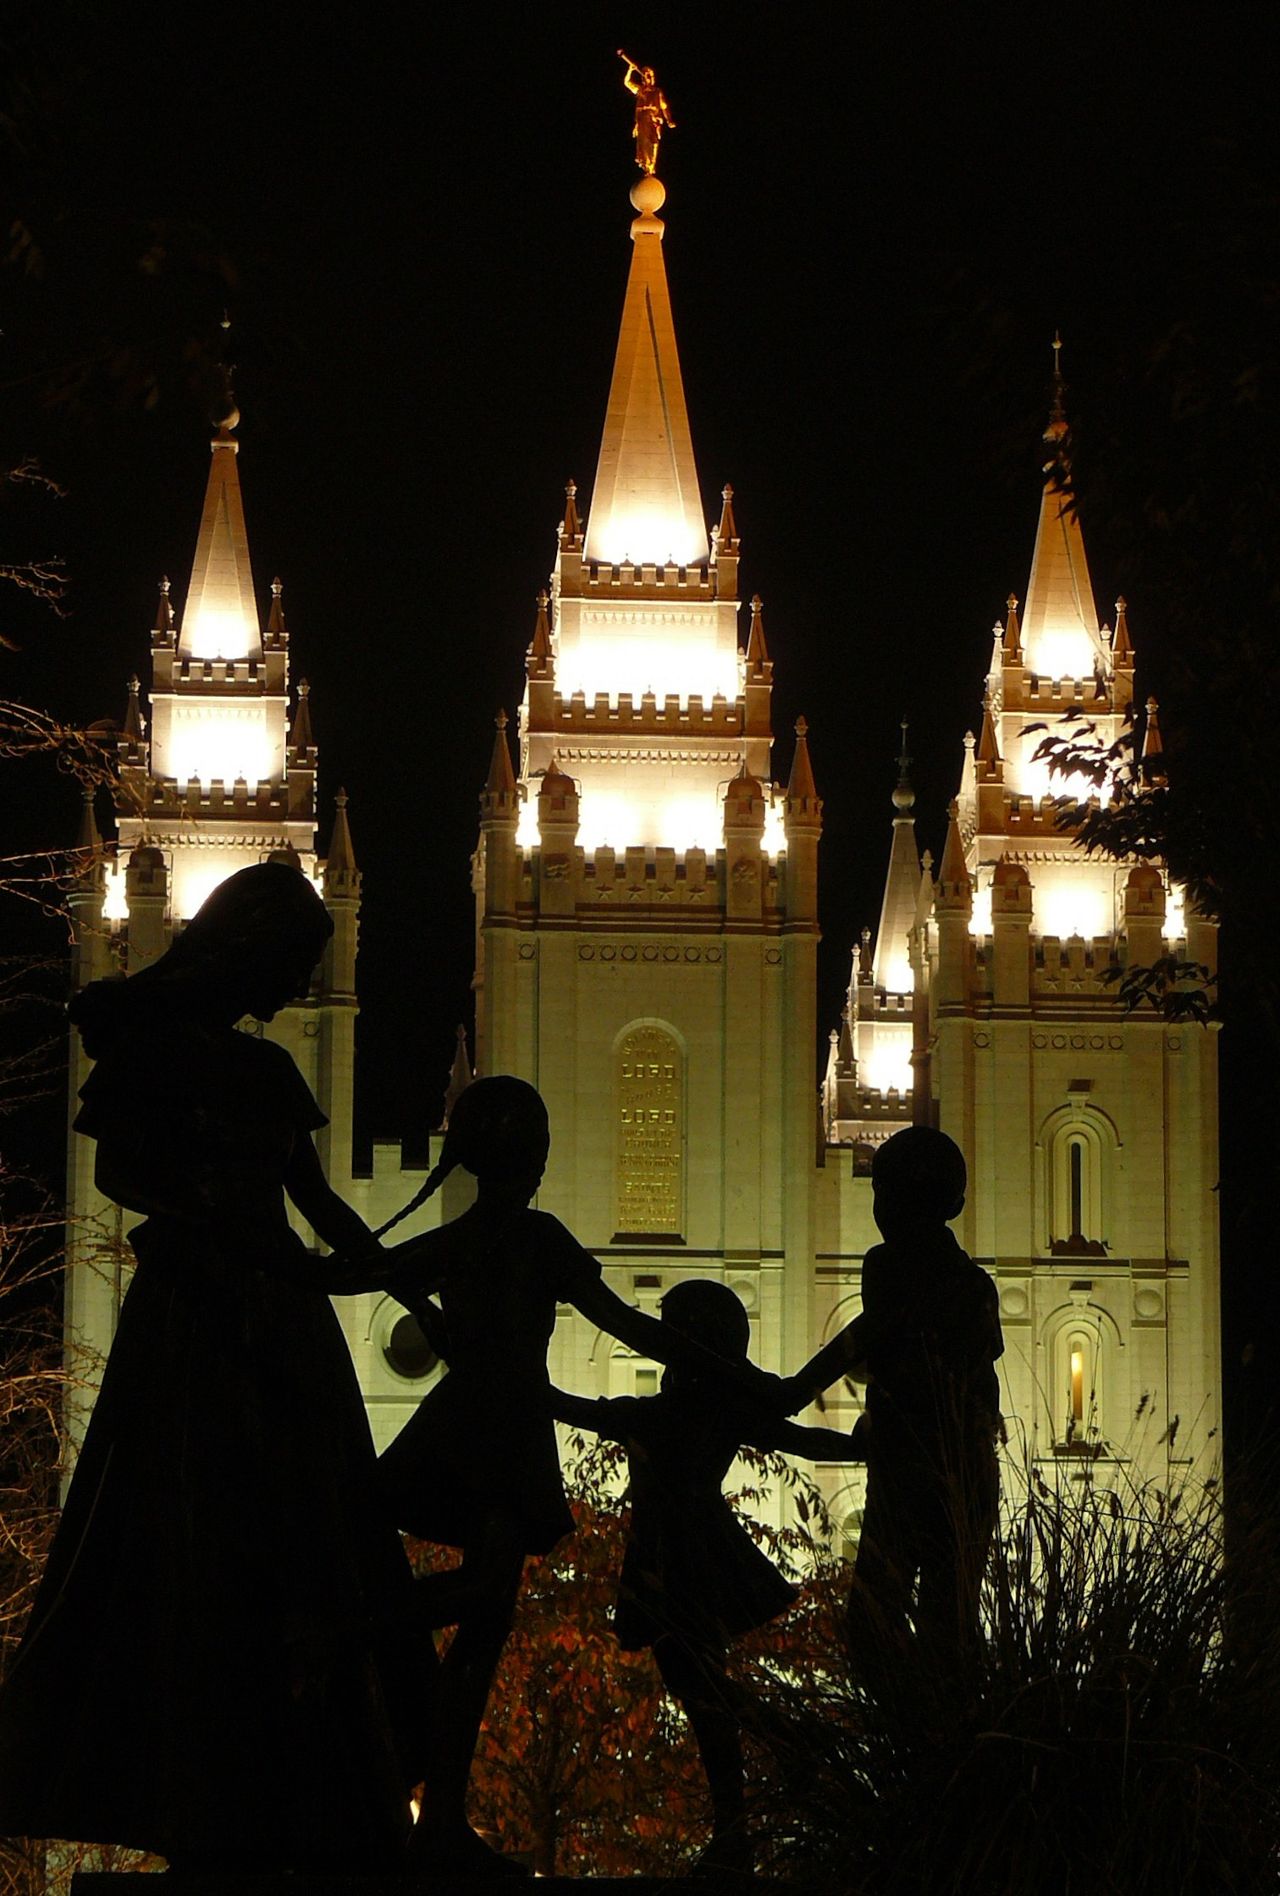 The Salt Lake Temple in the evening, including the statue and scenery.